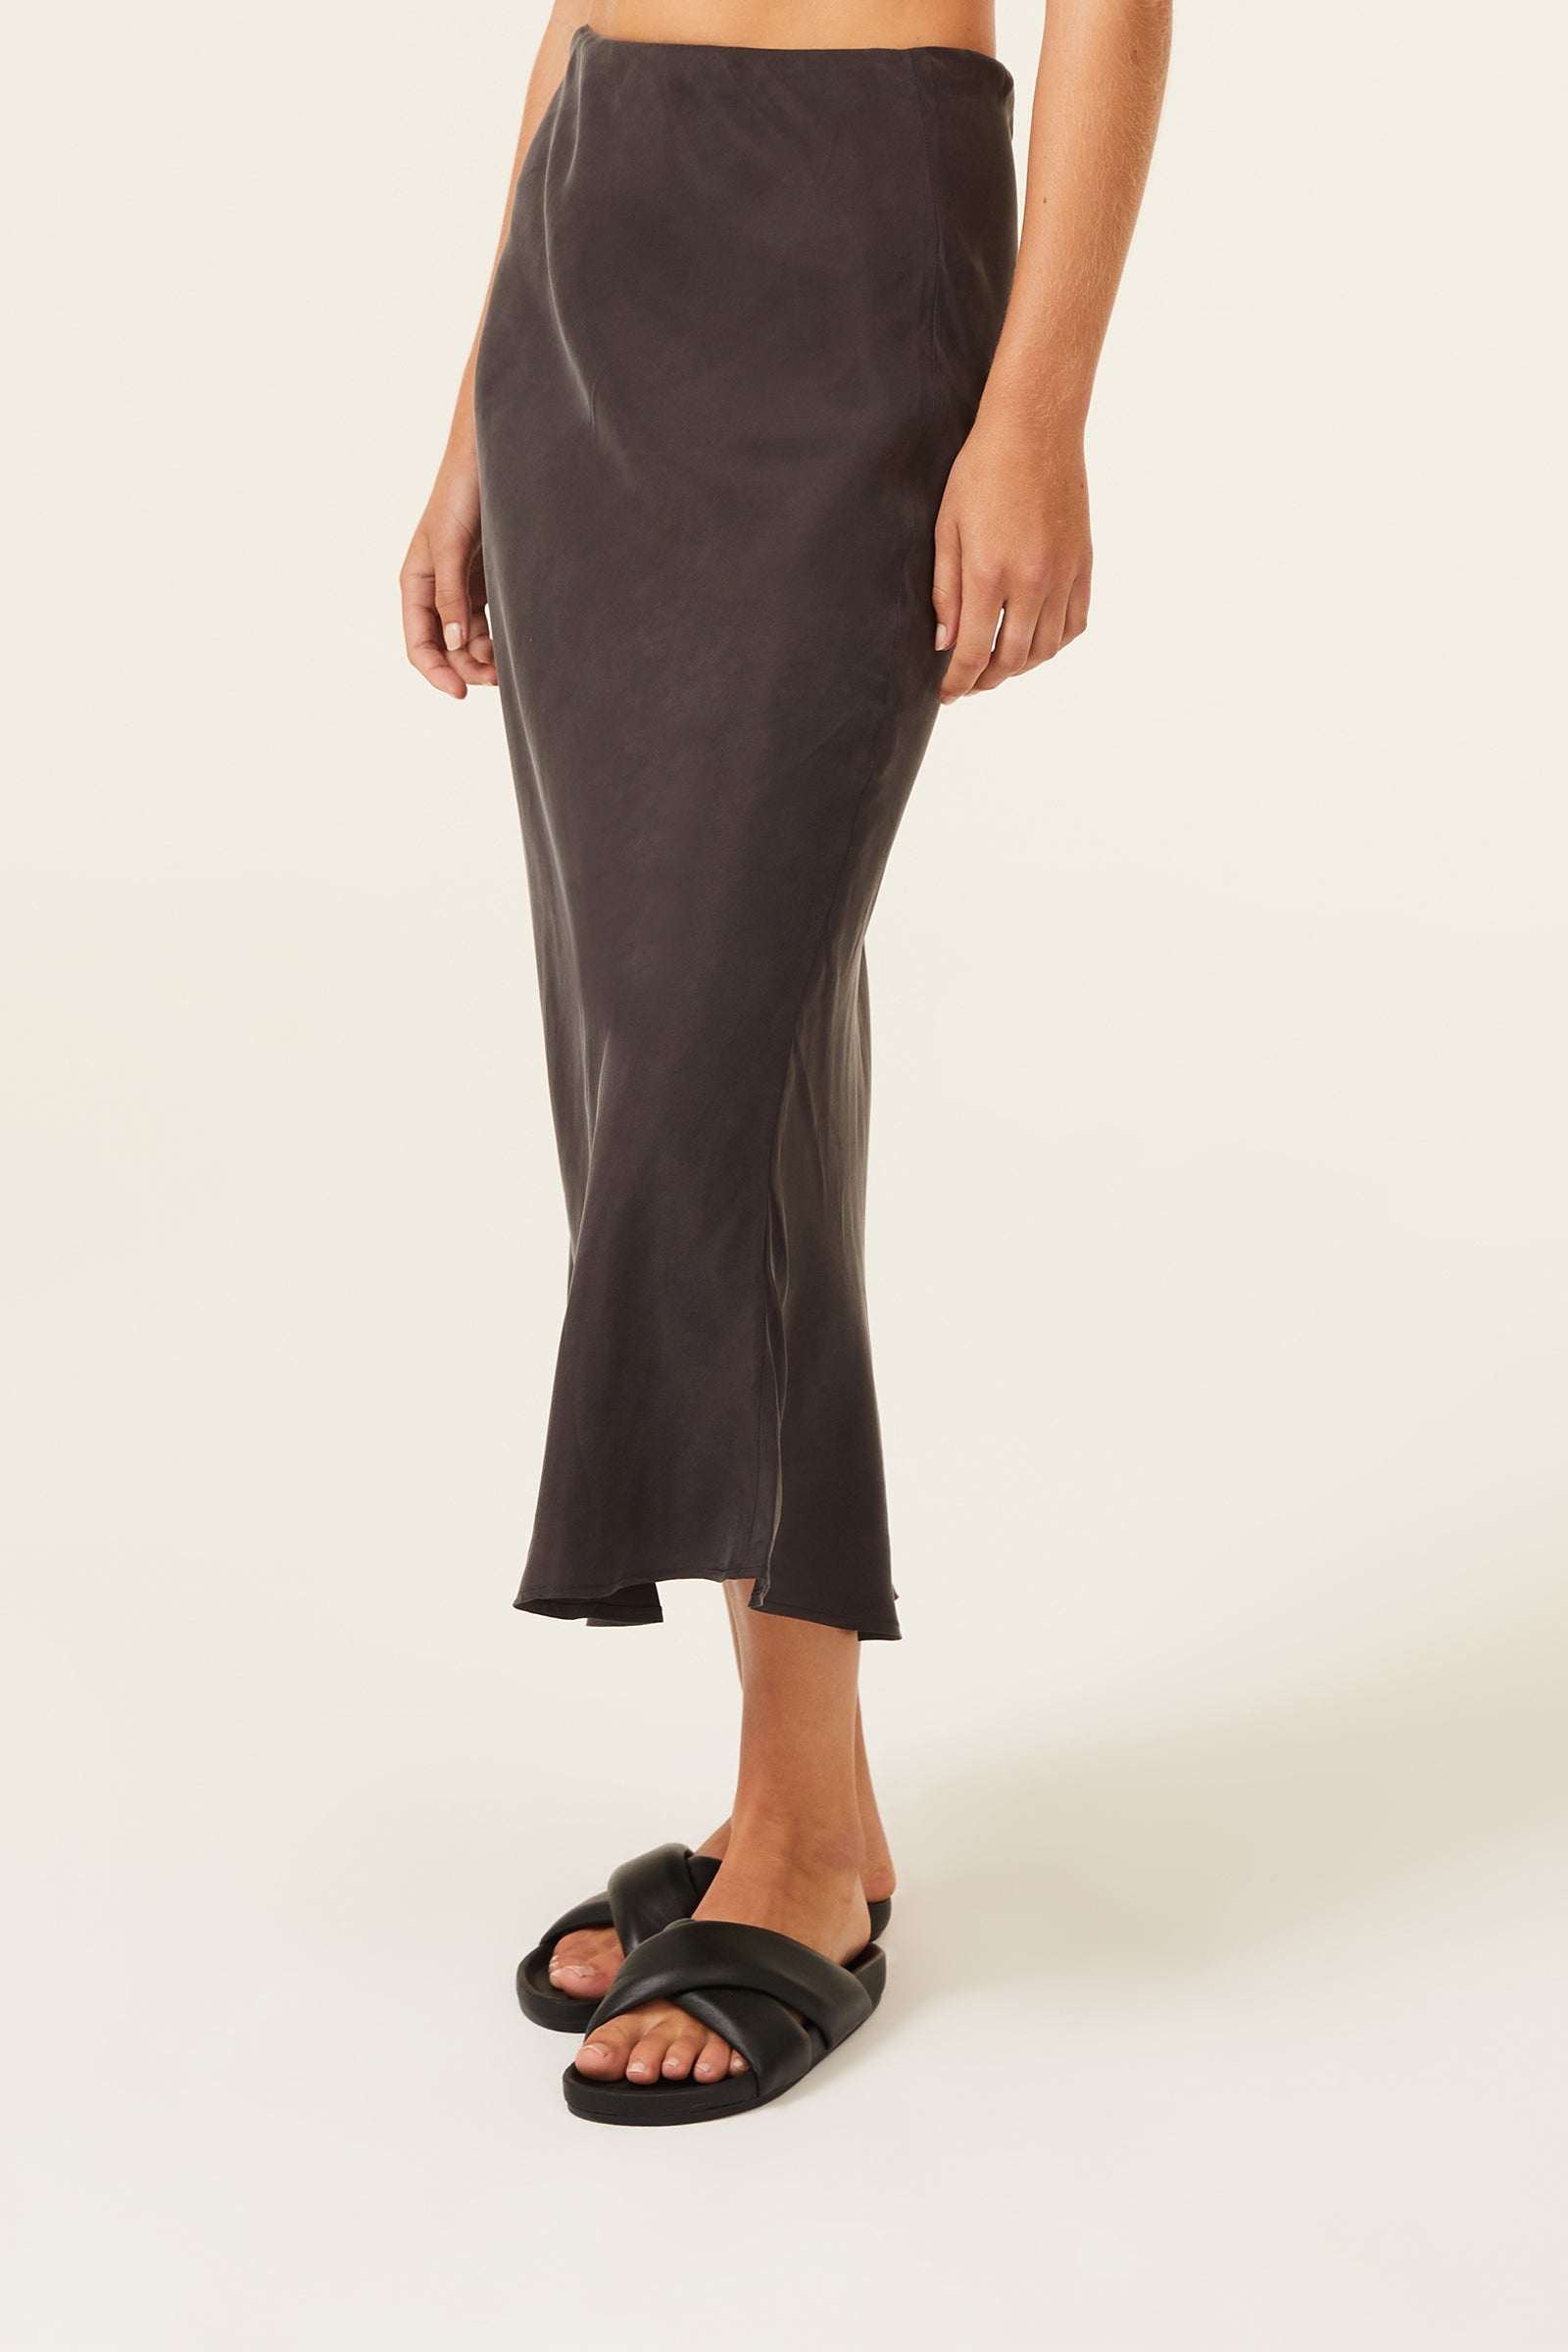 Nude Lucy Harlow Cupro Midi Skirt In A Dark Grey In A Brown Coal Colour 